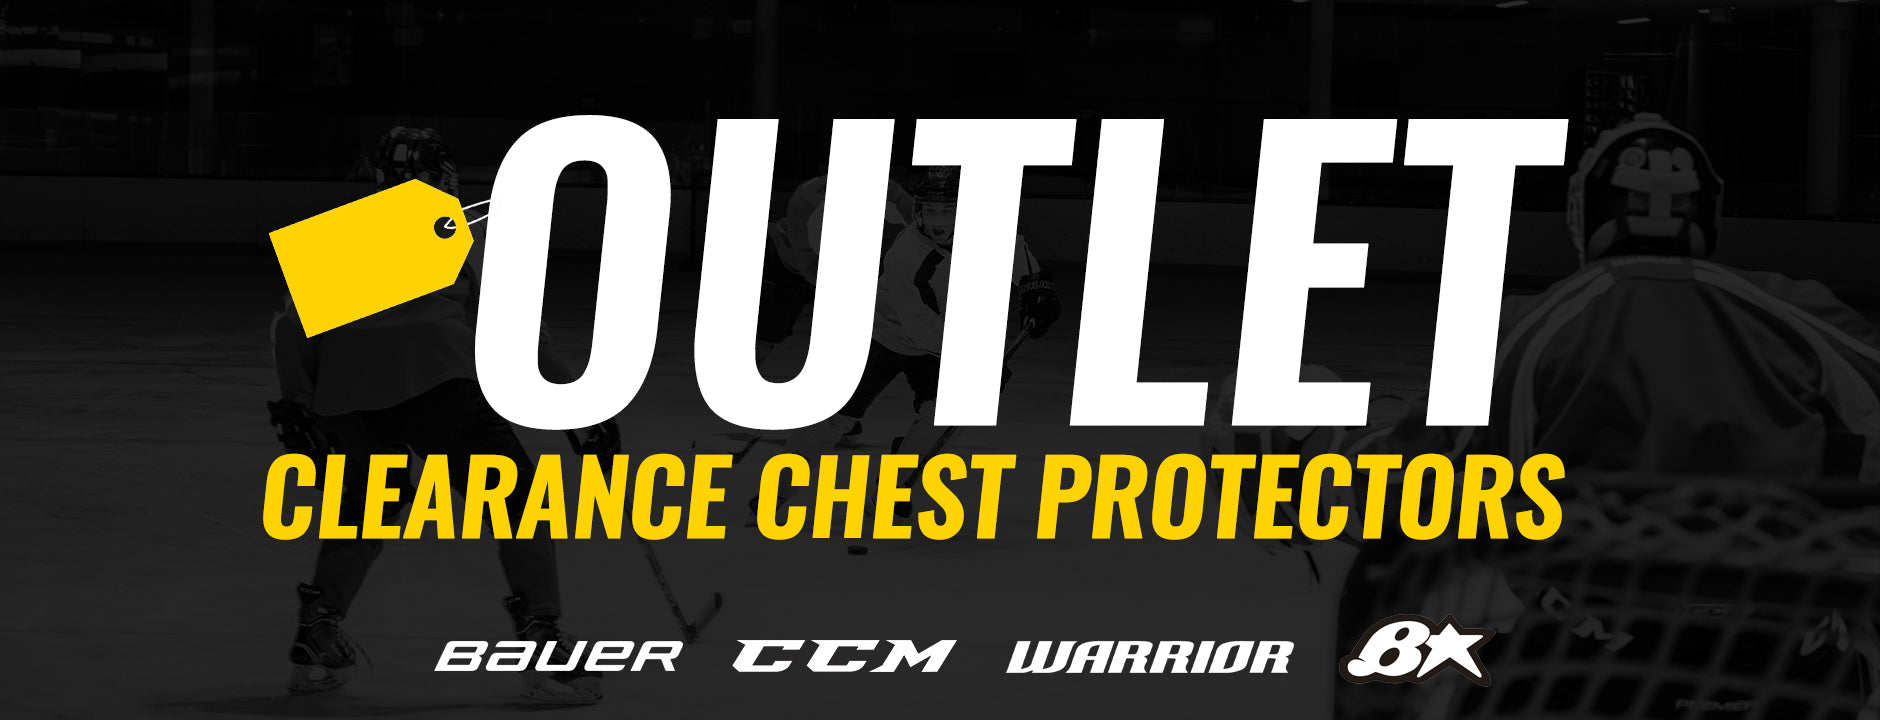 Clearance Goalie Chest Protectors